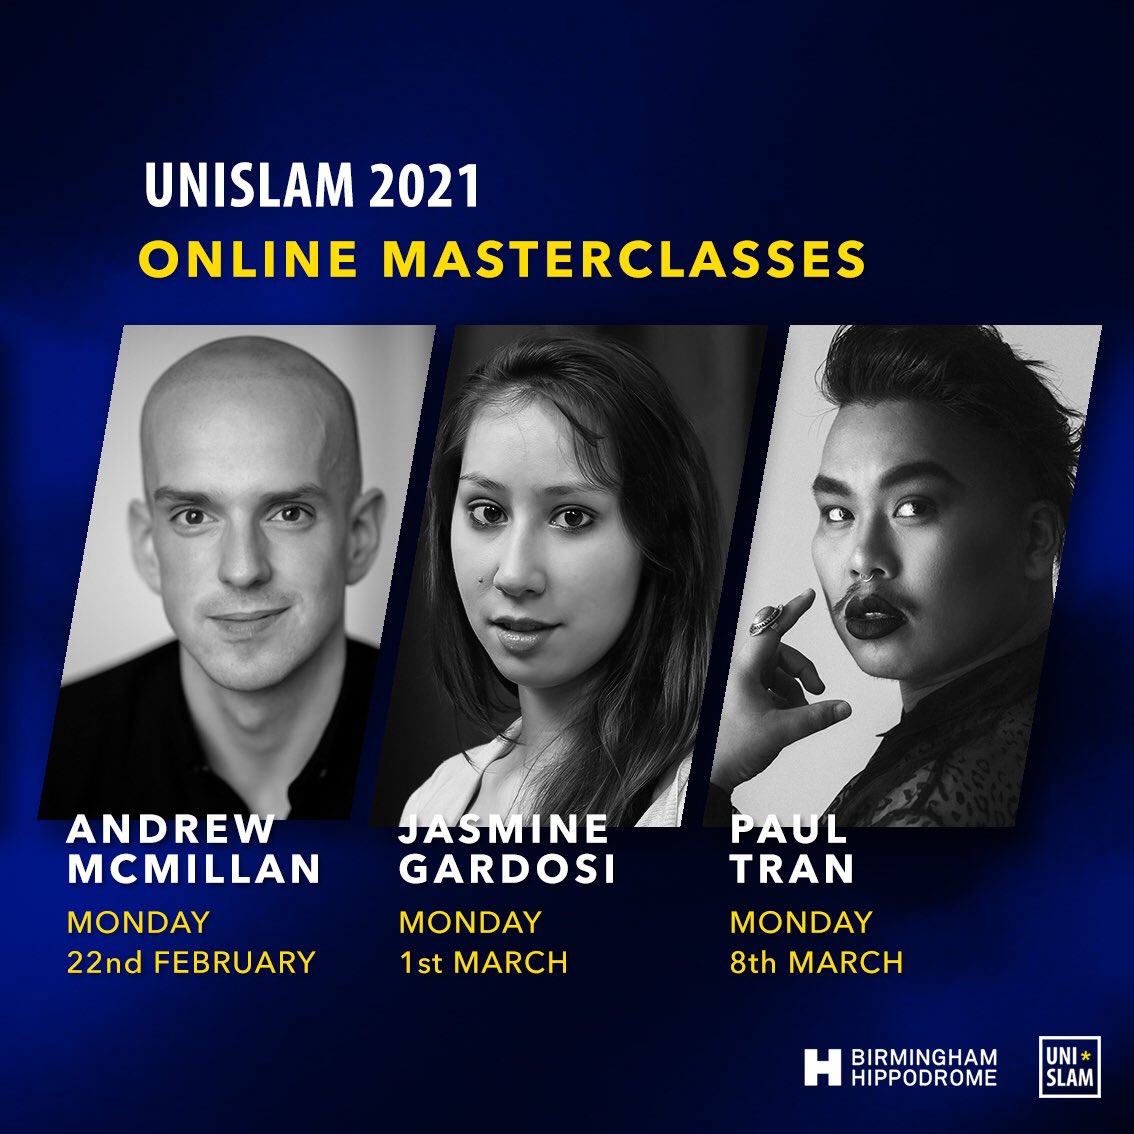 Thrilled to announce our Online Masterclass lineup for this year’s UniSlam teams - award winning poets @AndrewPoetry, @JasmineGardosi & @speakdeadly